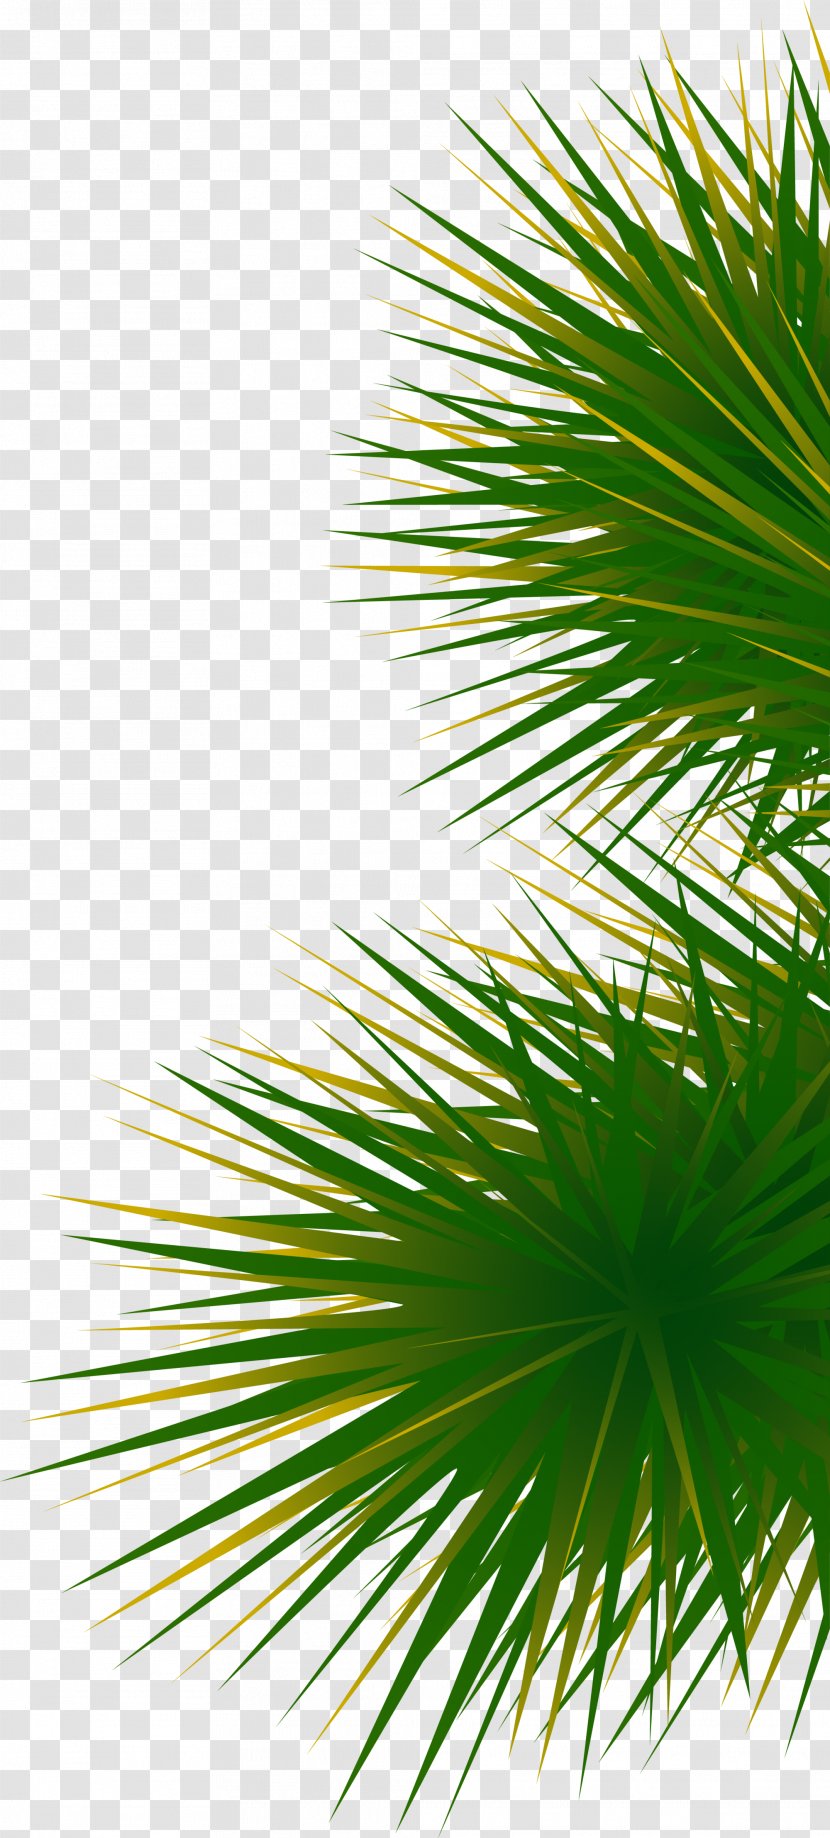 Green And Simple Grass - Asian Palmyra Palm - Borassus Flabellifer Transparent PNG